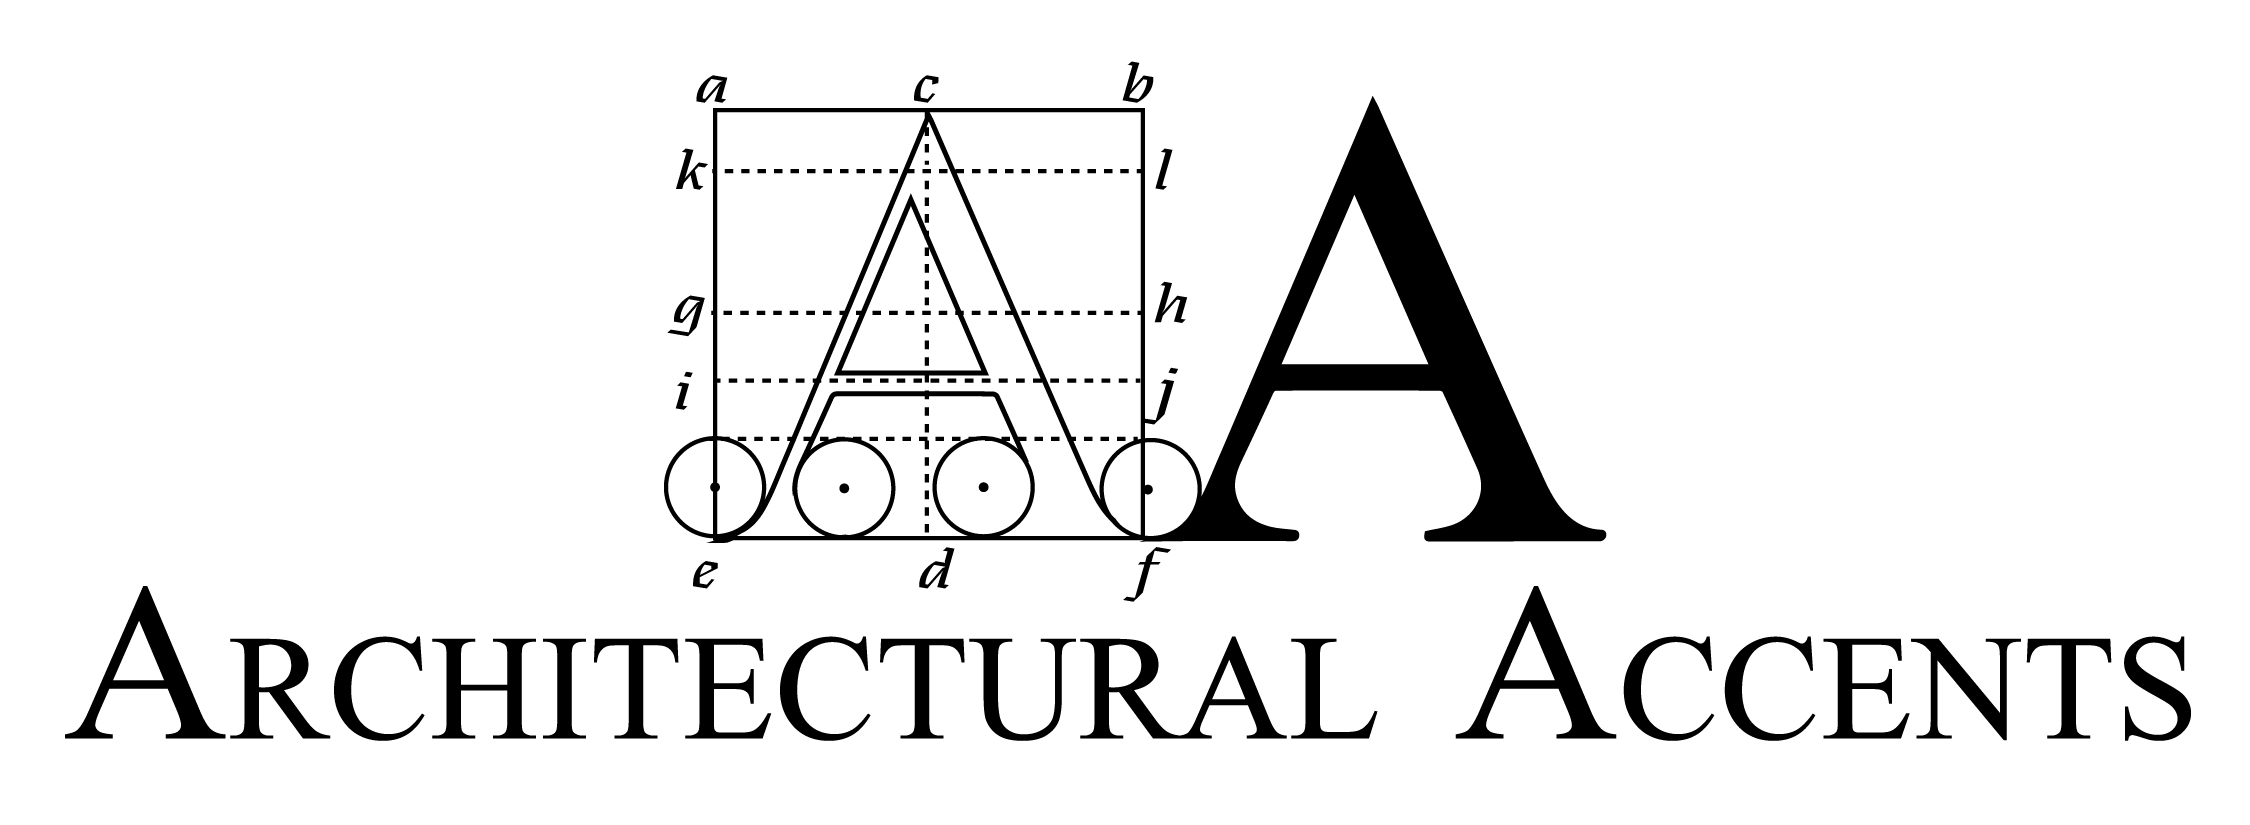 Architectural Accents Logo